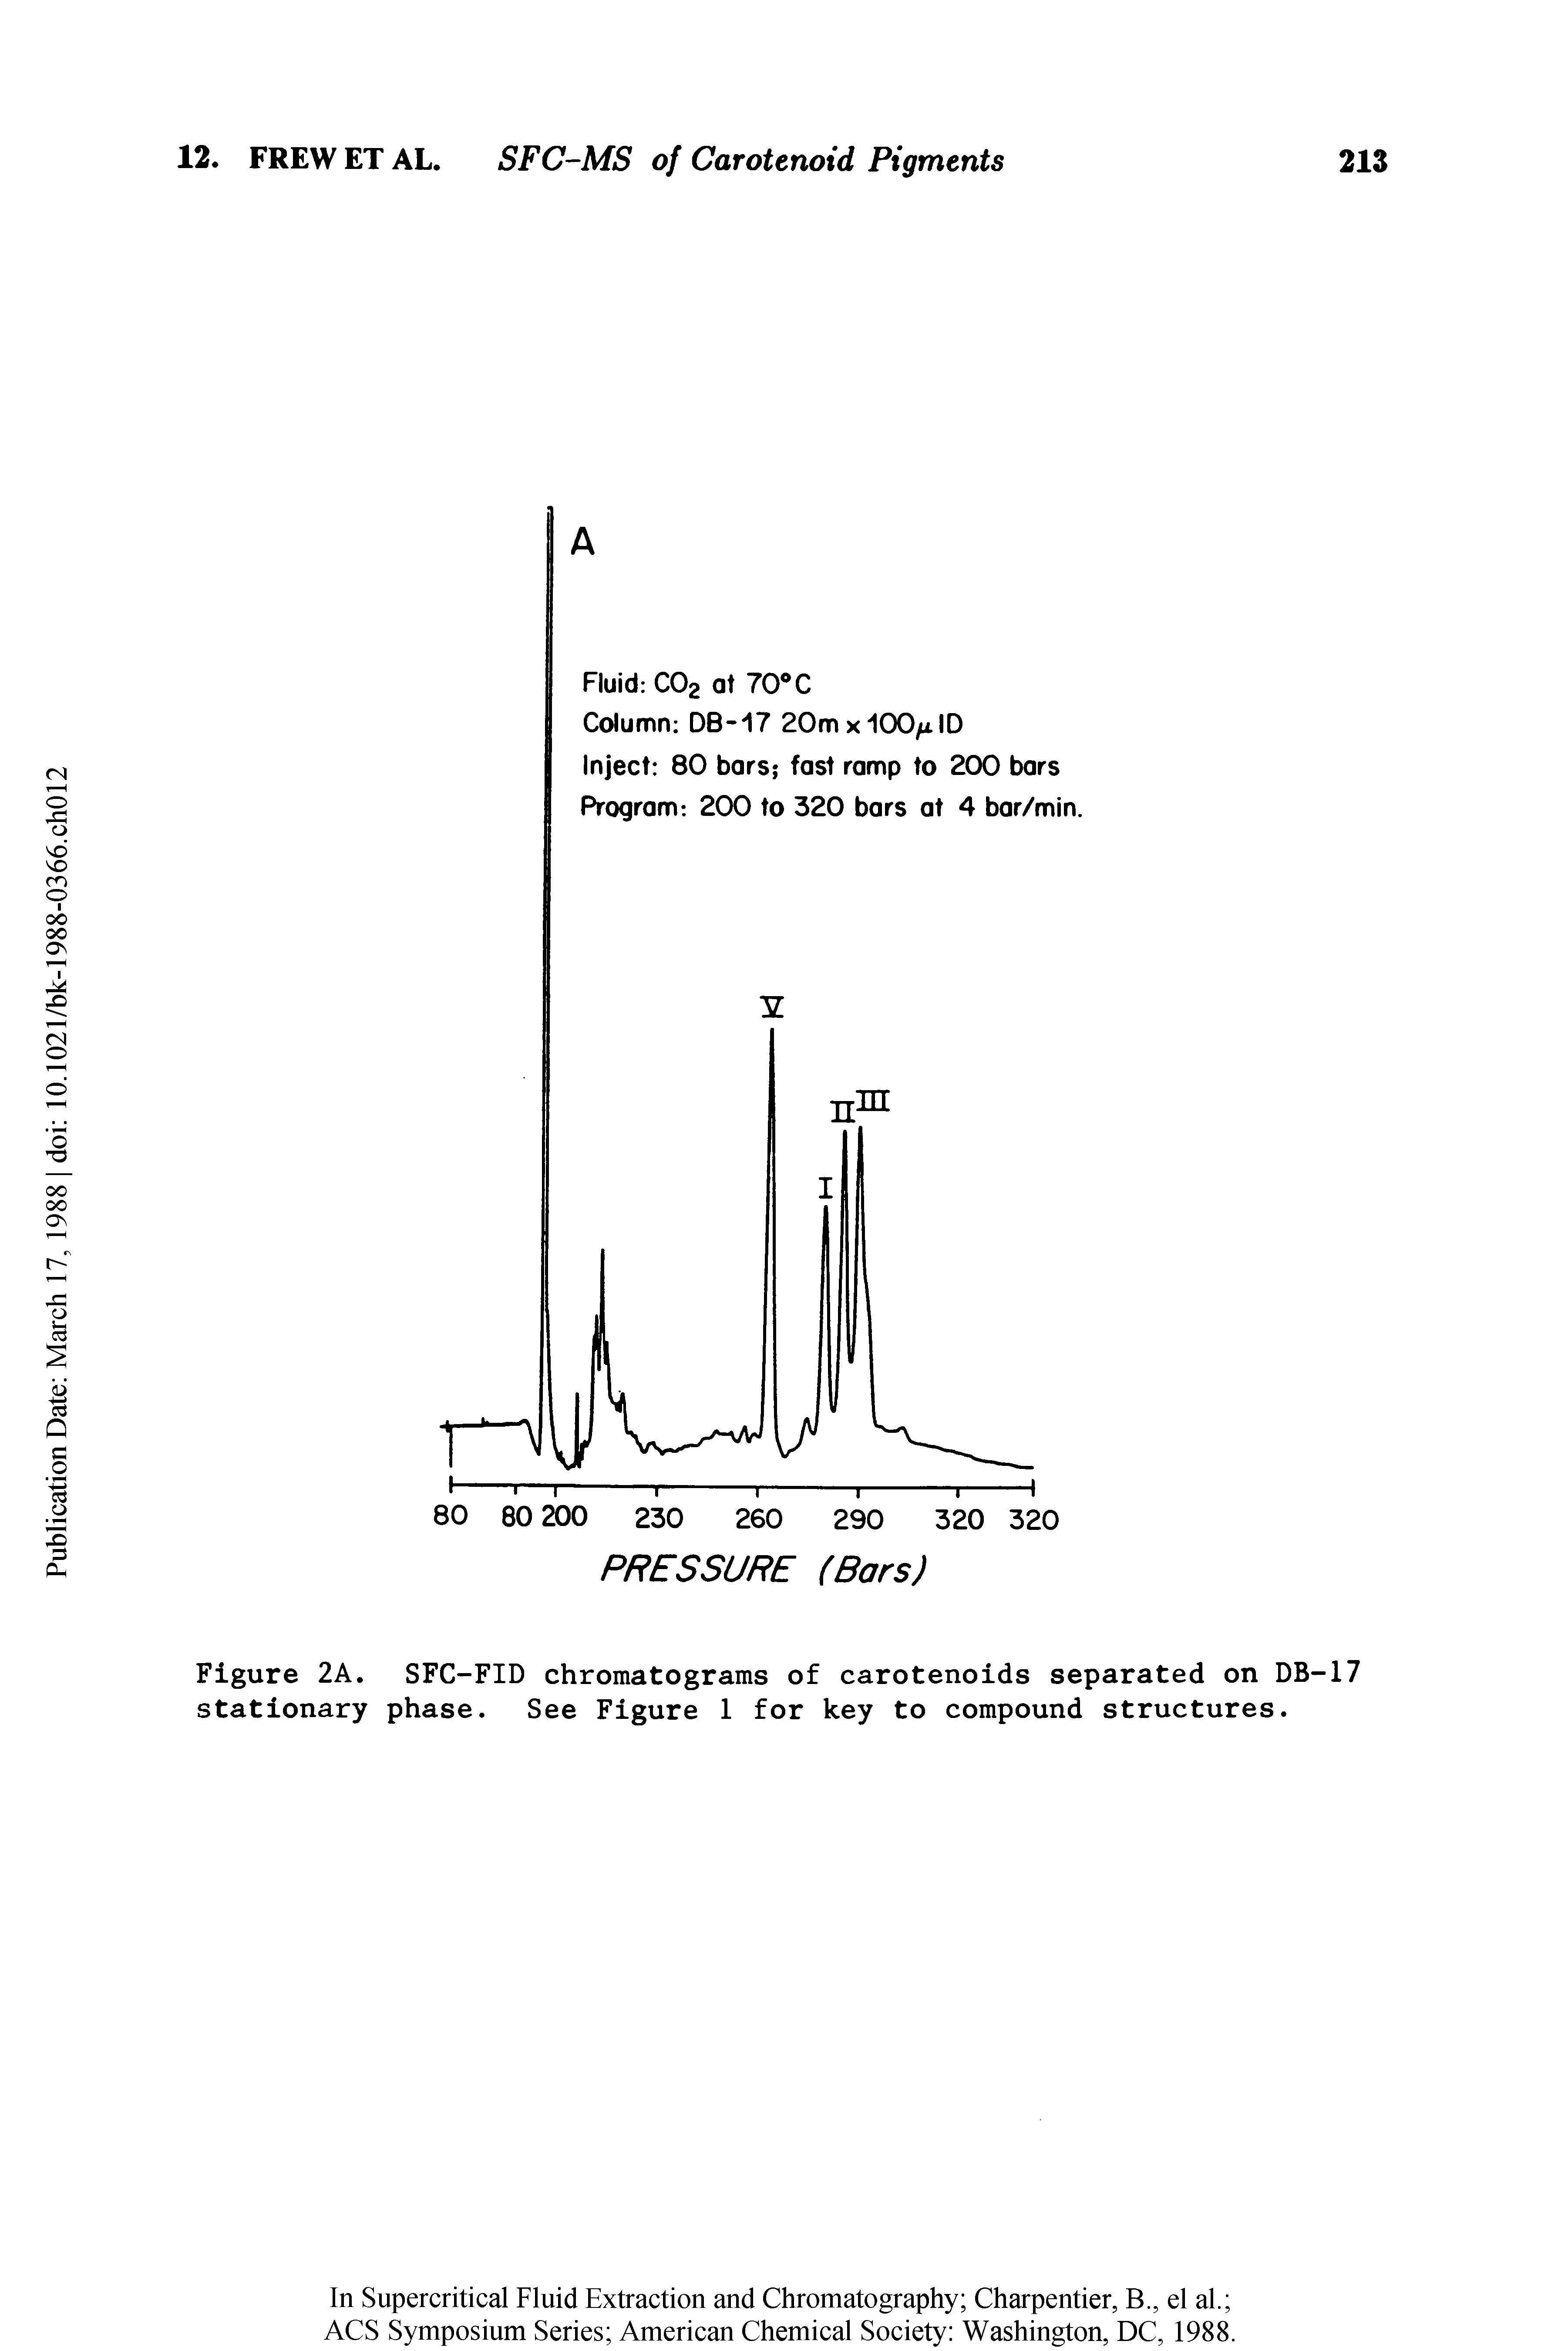 Figure 2A. SFC-FID chromatograms of carotenoids separated on DB-17 stationary phase. See Figure 1 for key to compound structures.